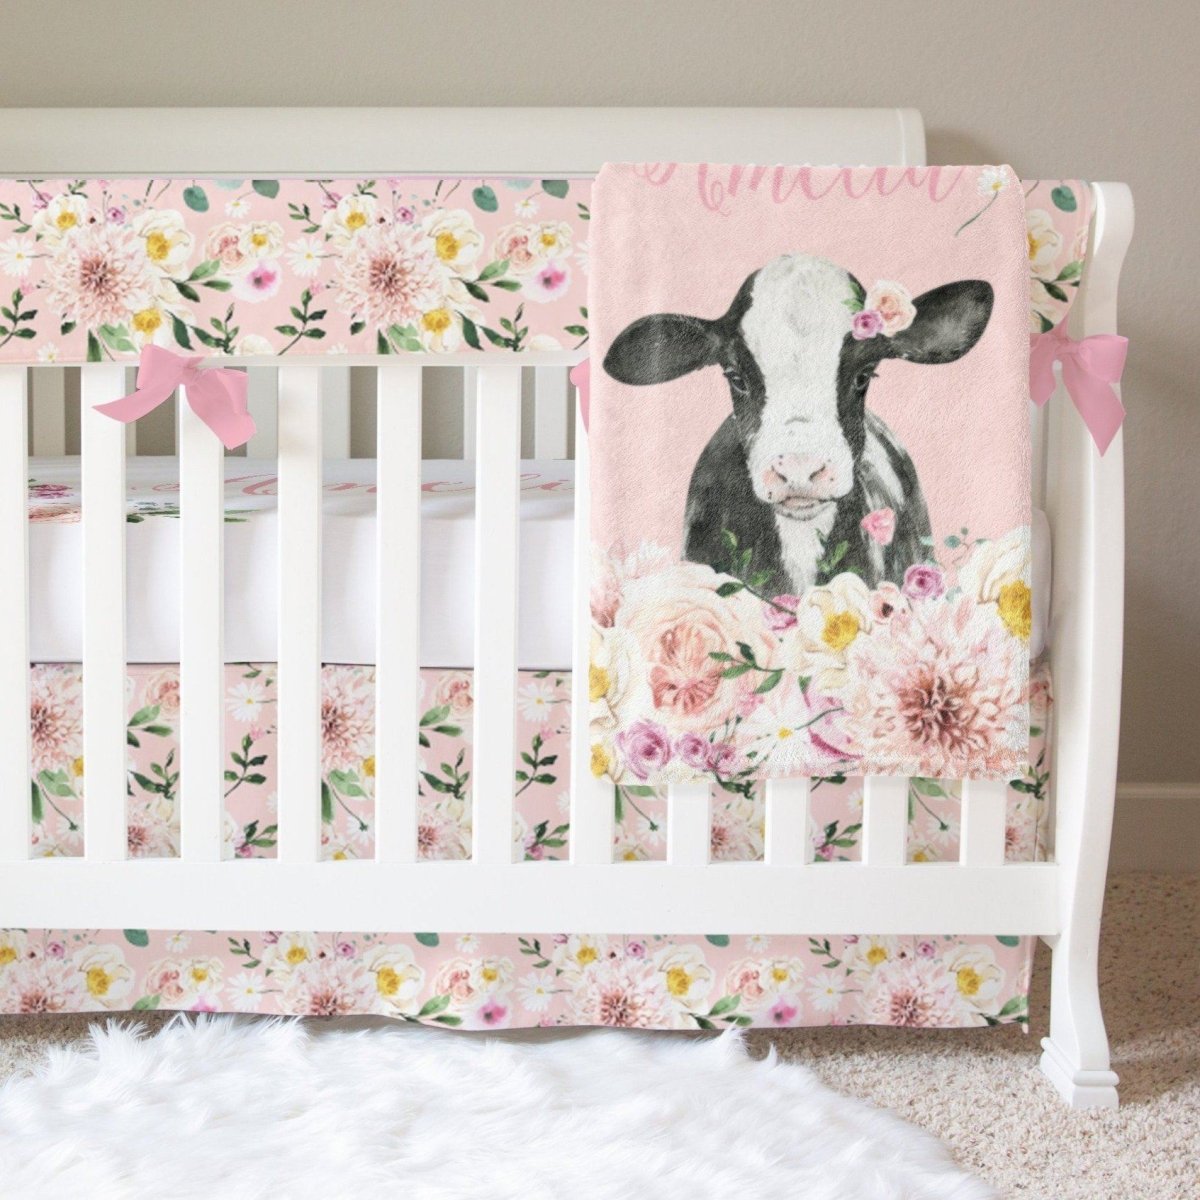 Farm Floral Personalized Crib Sheet - gender_girl, Personalized_Yes, text